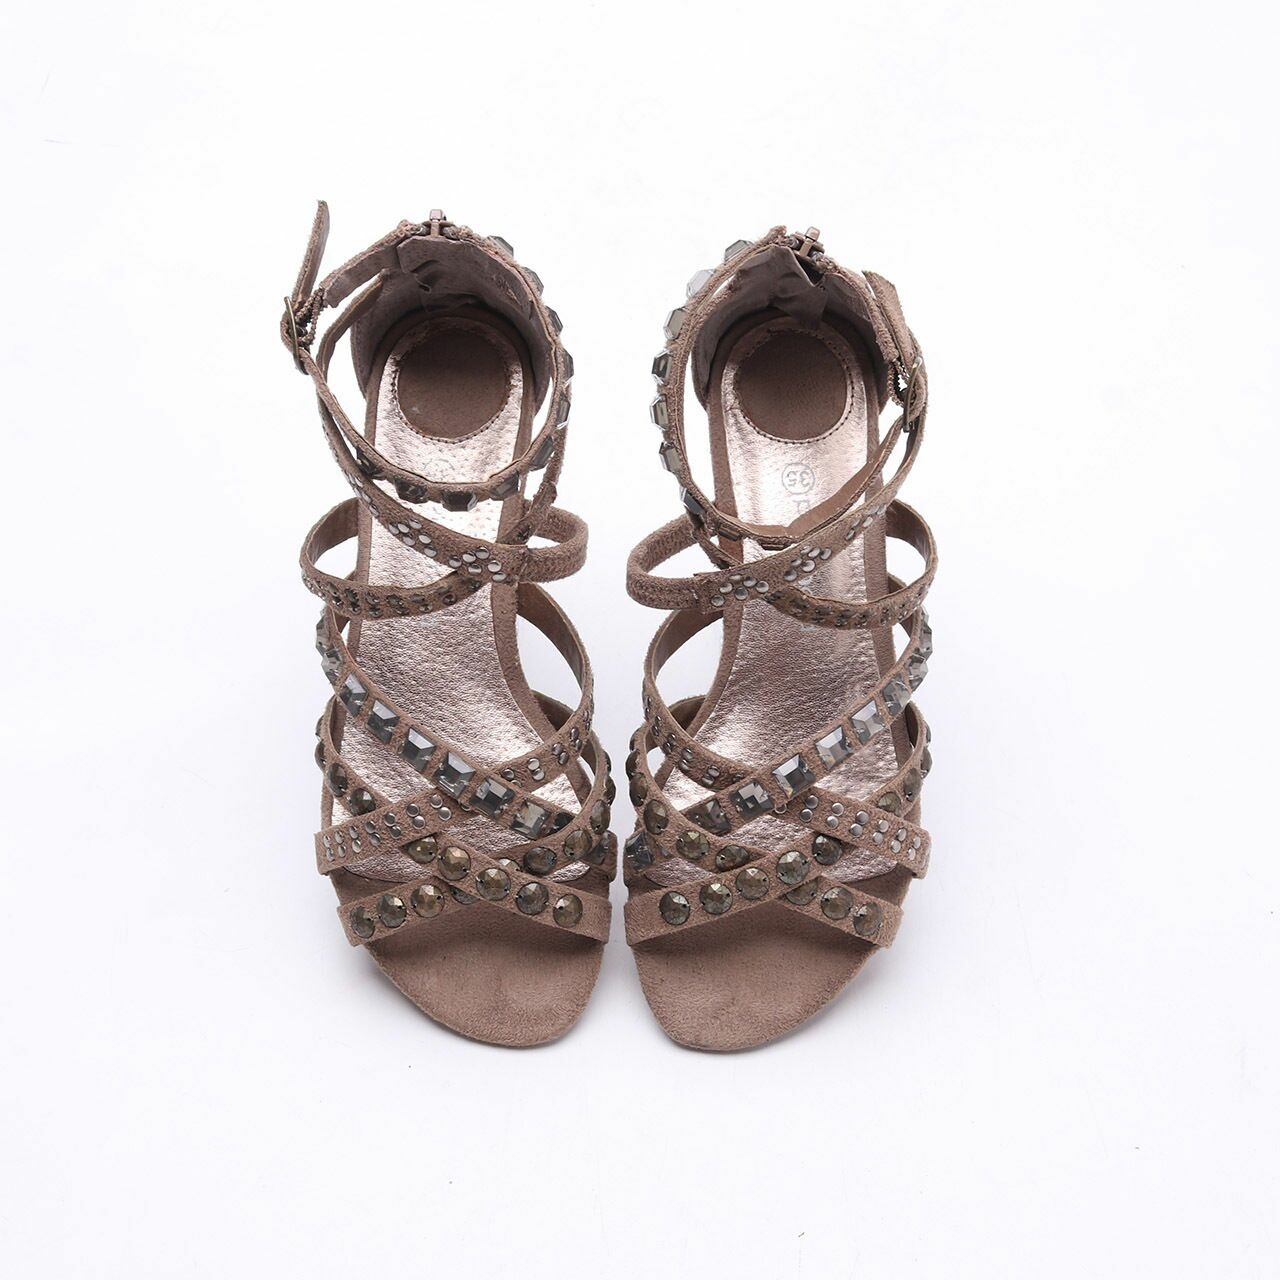 Promod Taupe Suede Beaded Sandals